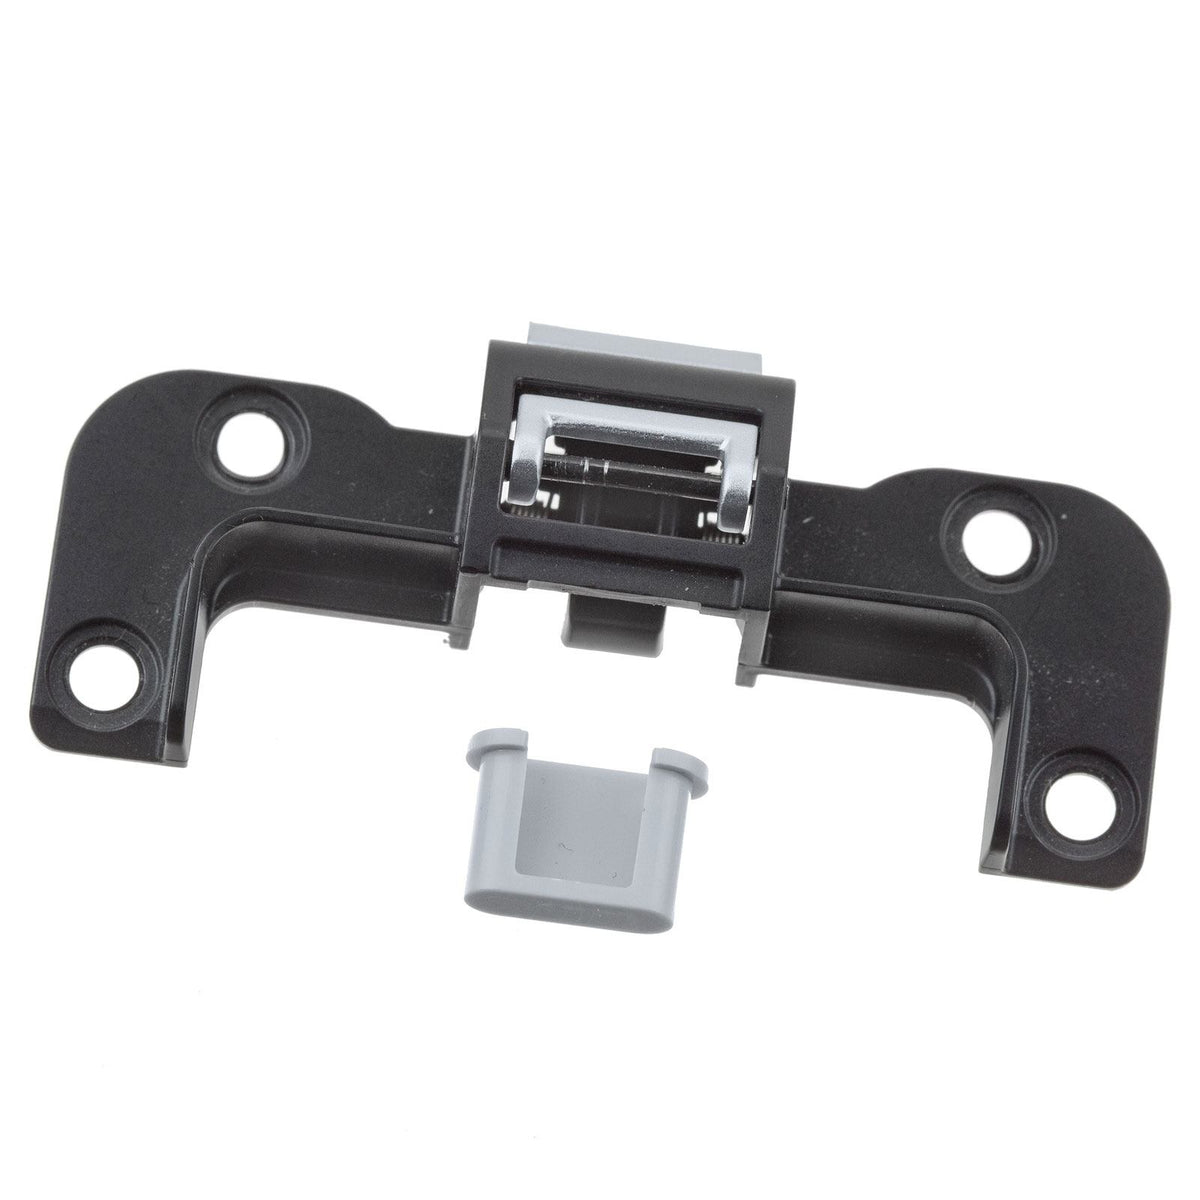 MEMORY DOOR LATCH (MDL) FOR IMAC 27" A1419 (LATE 2012)